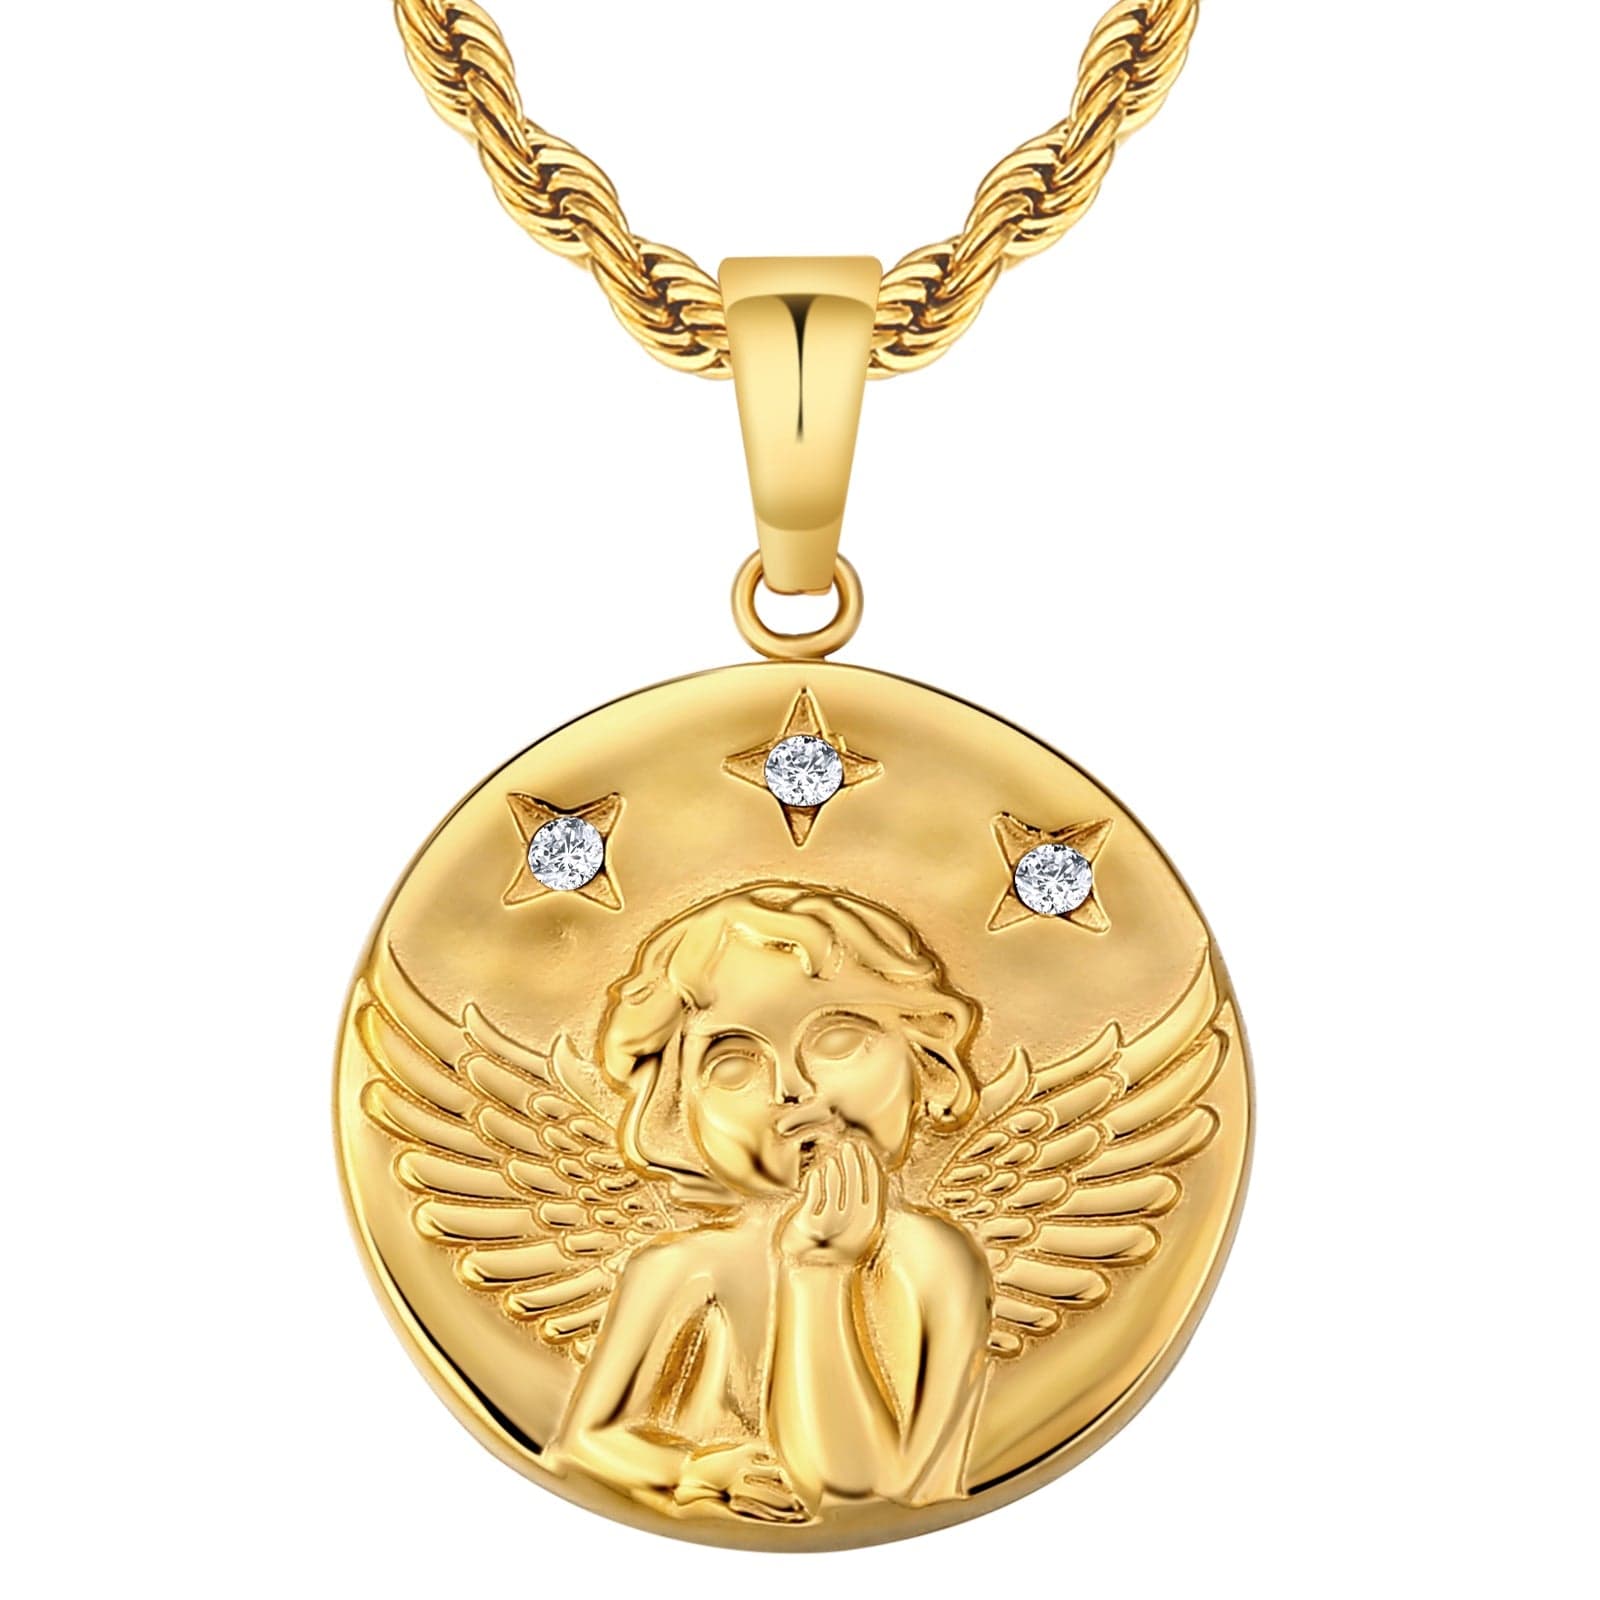 KRKC&CO Mens Coin Pendant Necklace, Compass 18K Gold Plated